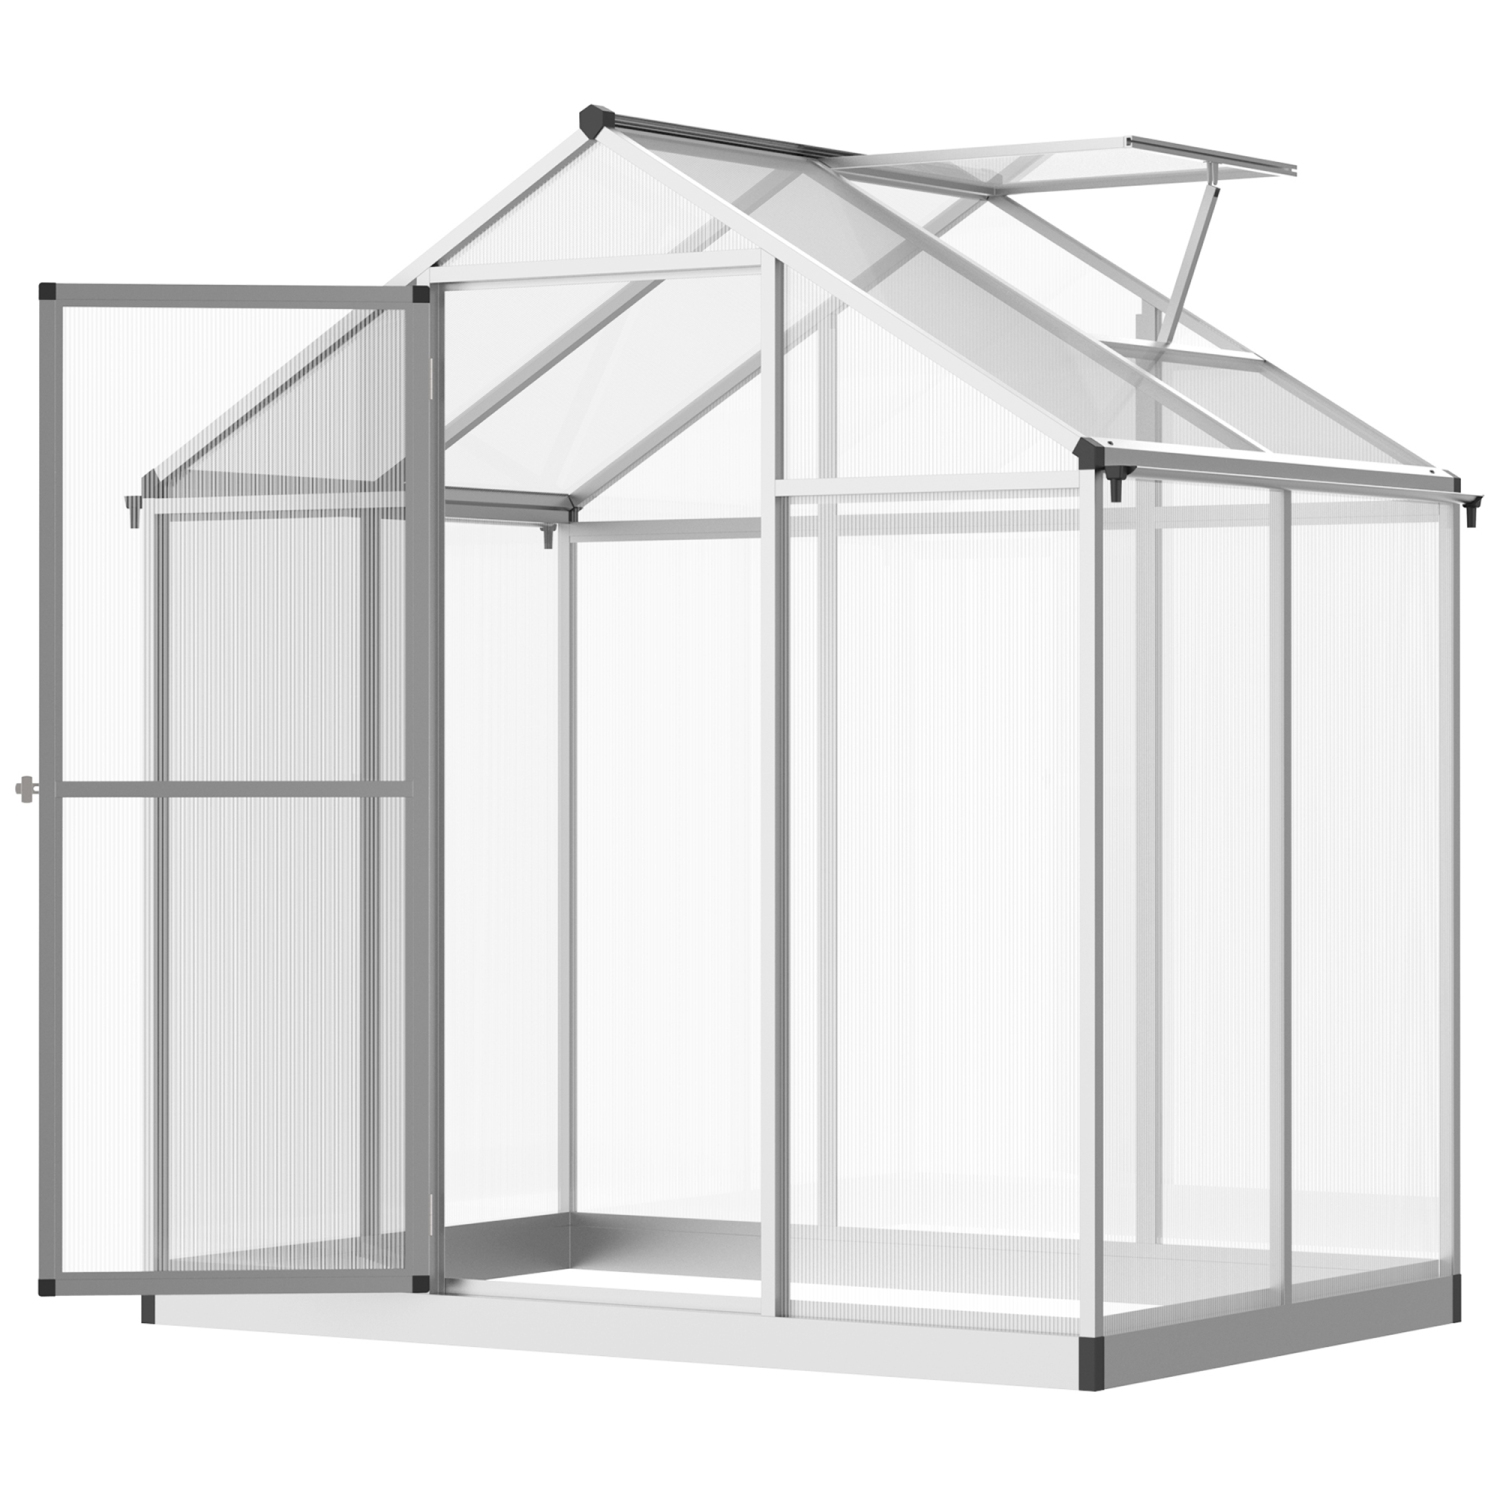 Outsunny 4' x 6' x 6.4' Walk-in Garden Greenhouse Polycarbonate Panels Plants Flower Growth Shed Cold Frame Outdoor Portable Warm House Aluminum Frame